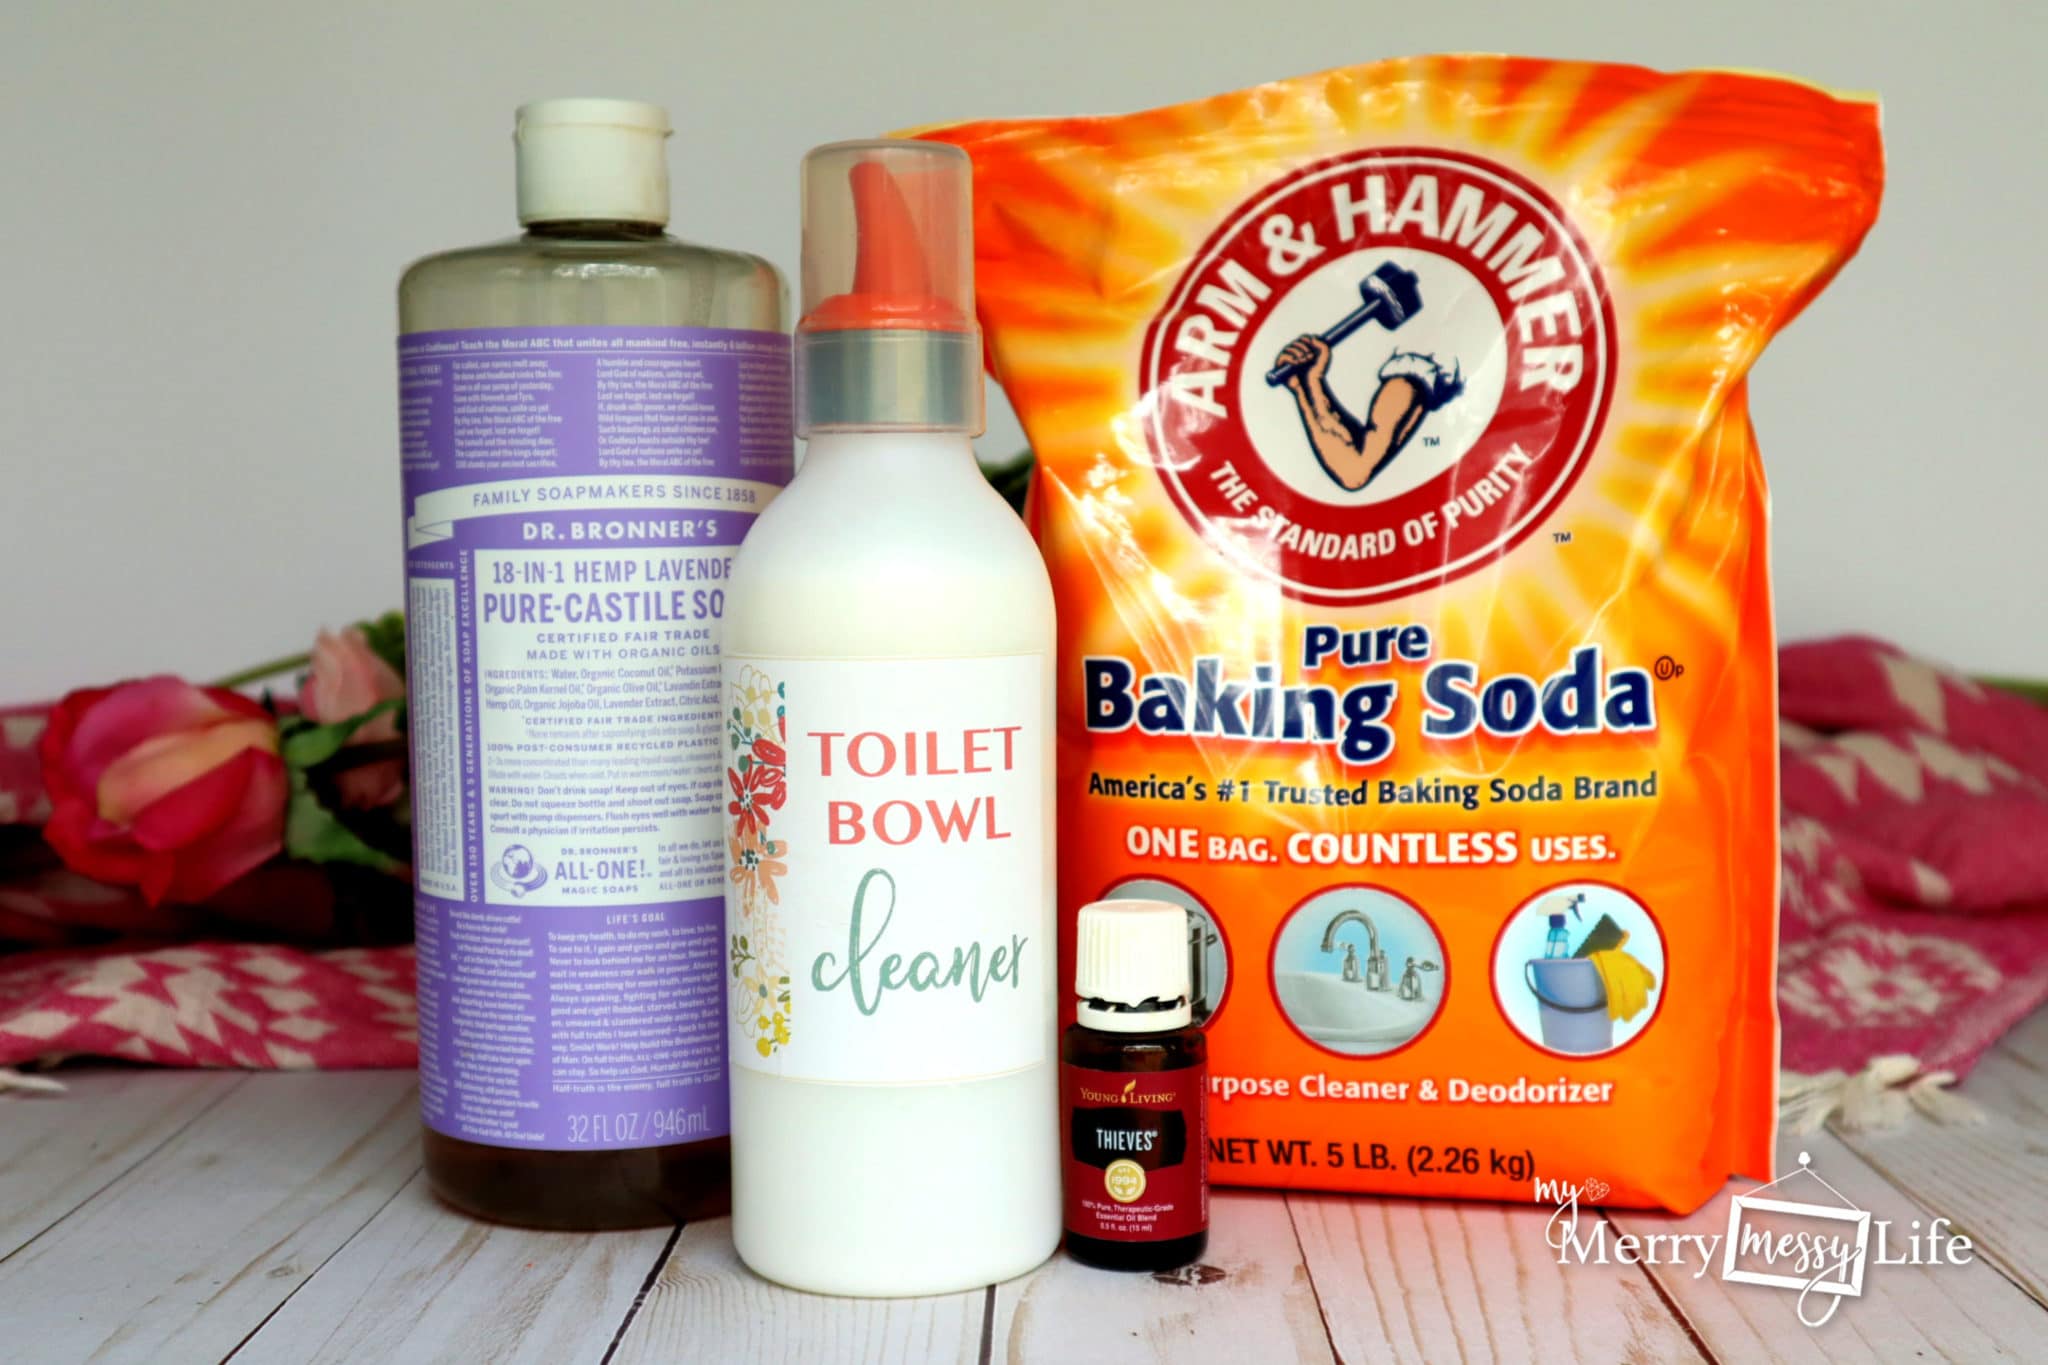 DIY Natural Toilet Bowl Cleaner Recipe Ingredients - Baking Soda, Castile Soap, water and Essential Oils